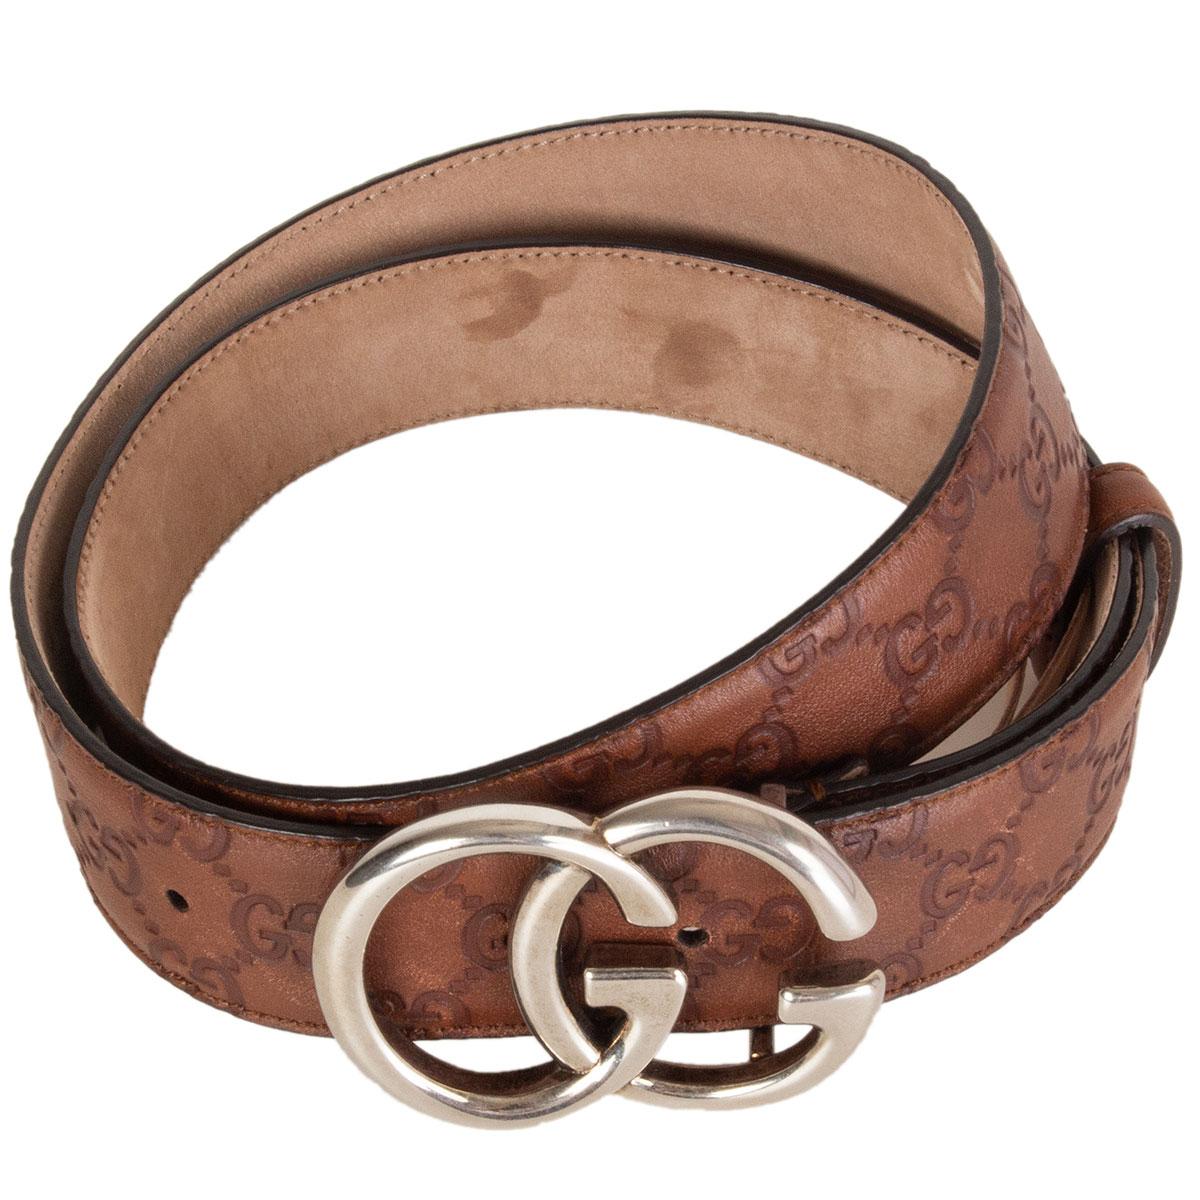 100% authentic Gucci Guccissima belt in brown embossed calfskin featuring silver-tone metal buckle. Has been worn and is in excellent condition. 

Tag Size 90
Width 4cm (1.6in)
Fits 86cm (33.5in) to 96cm (37.4in)
Length 102cm (39.8in)
Buckle Size